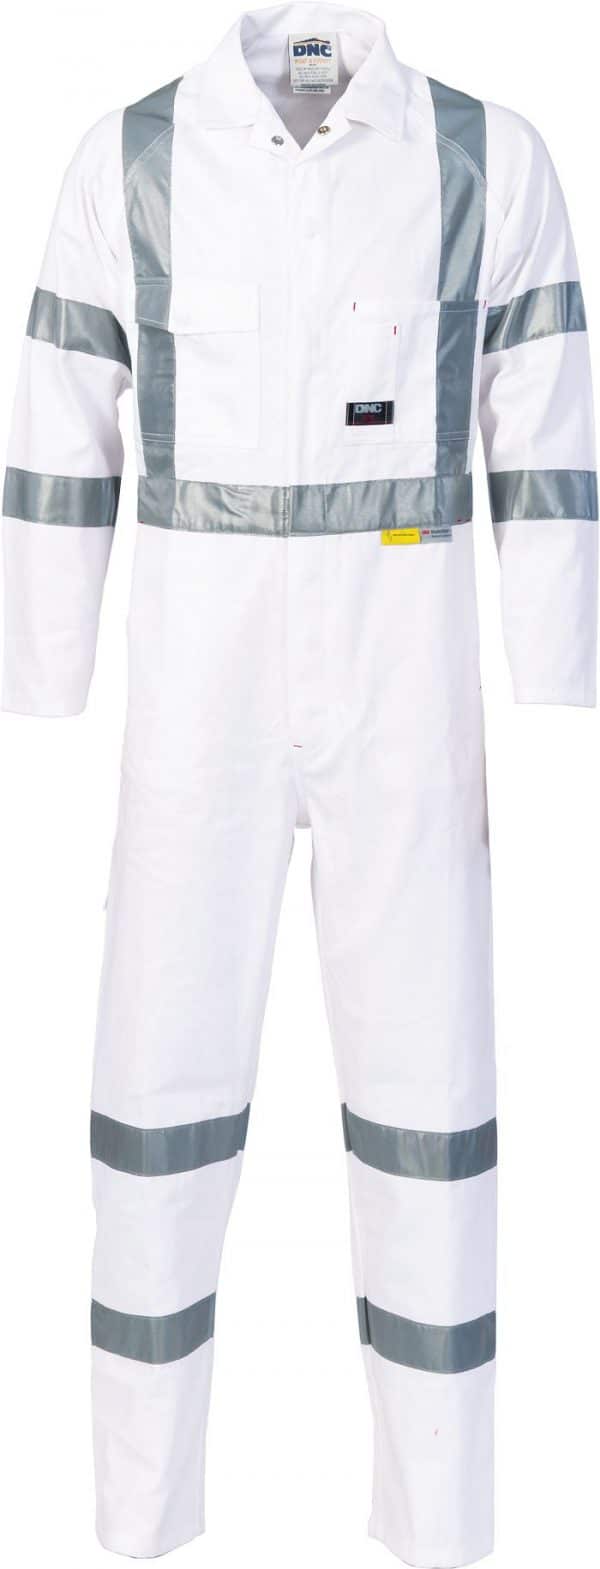 RTA Night Worker Coverall with 3M 8910 R/Tape. 100% Cotton. 311gsm. Regular Weight - 3856 - White